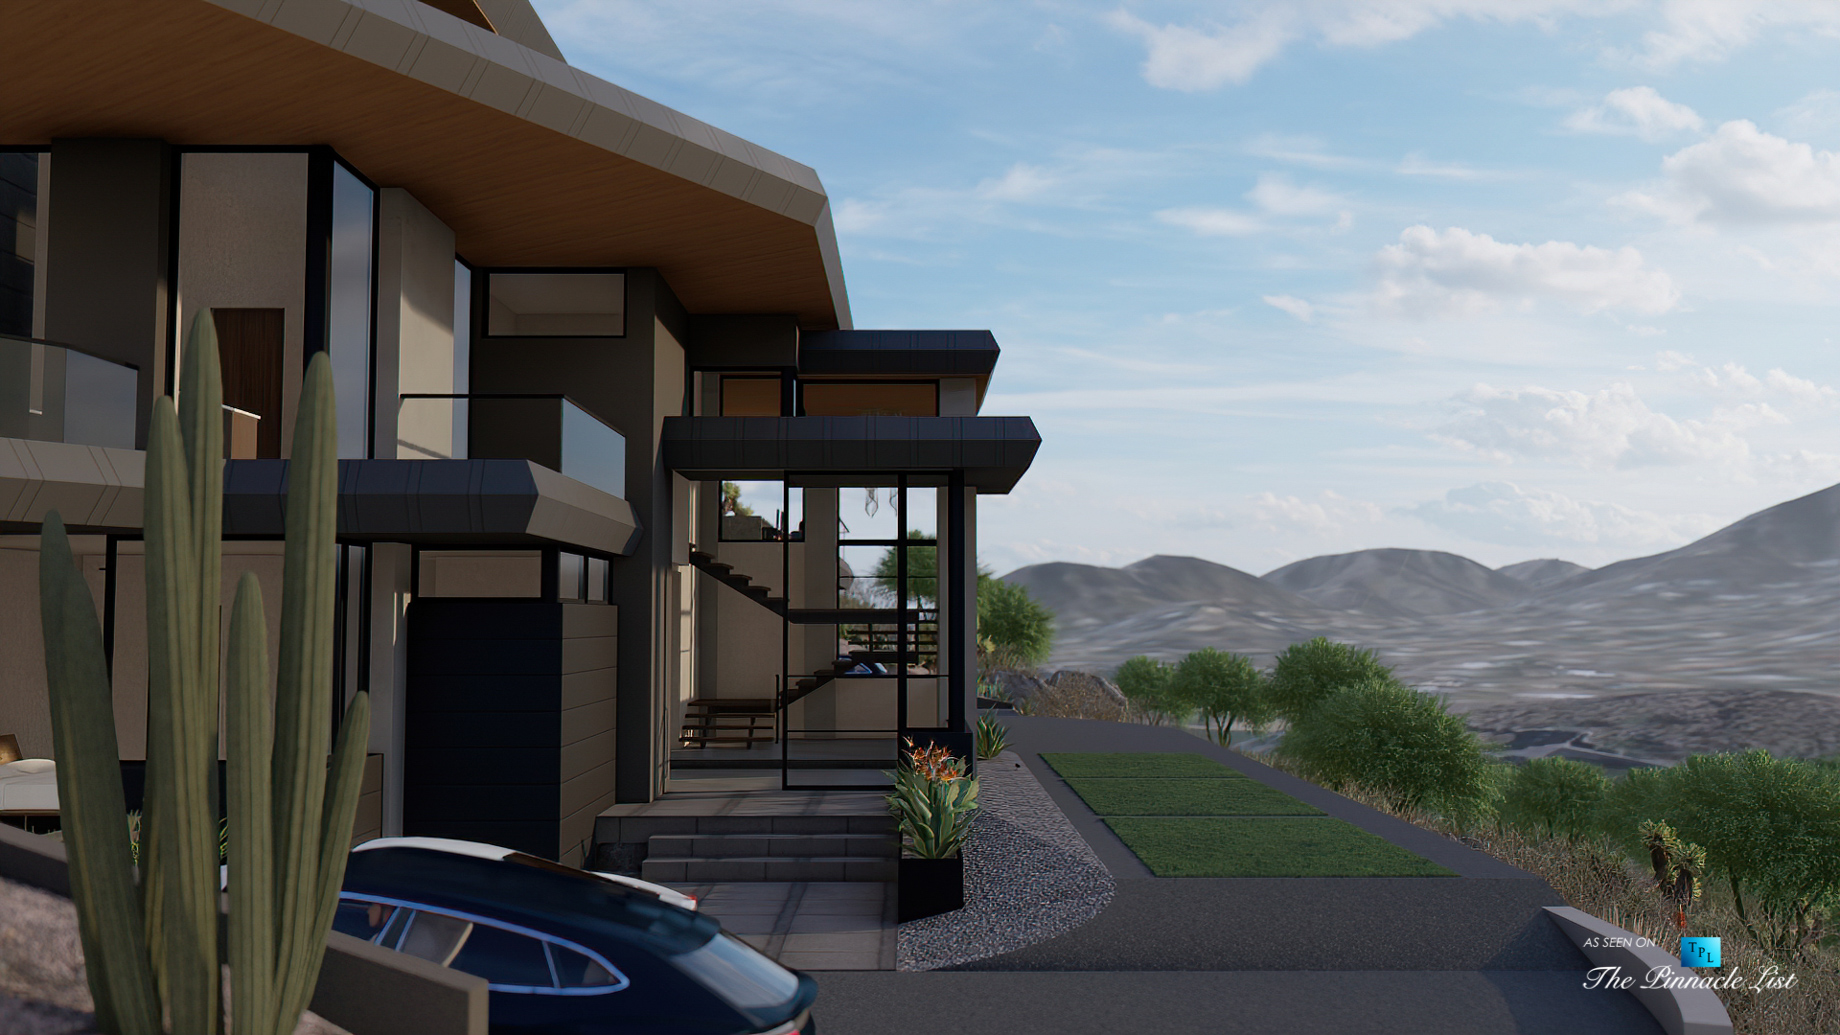 5221 E Cheney Dr, Paradise Valley, AZ, USA - Exterior Front Entrance View - Luxury Real Estate - Modern Hillside Home